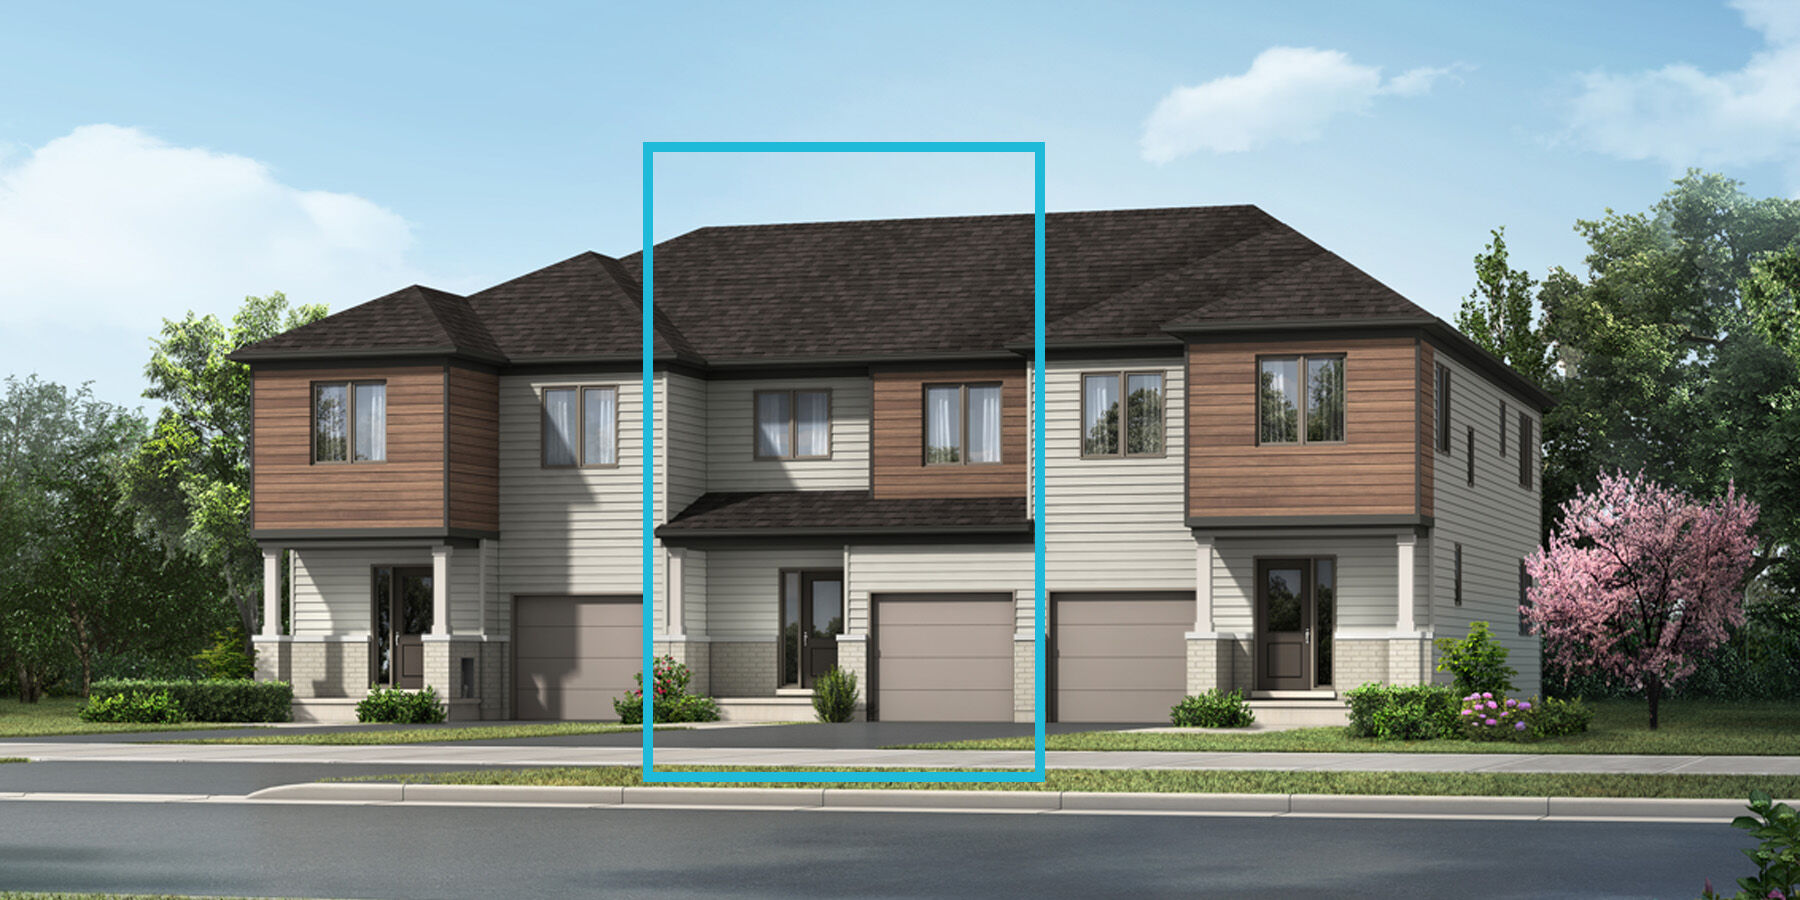 Beige coloured and wood siding Townhome rendering with windows and front door with a blue box indicating the relevant townhome in the middle